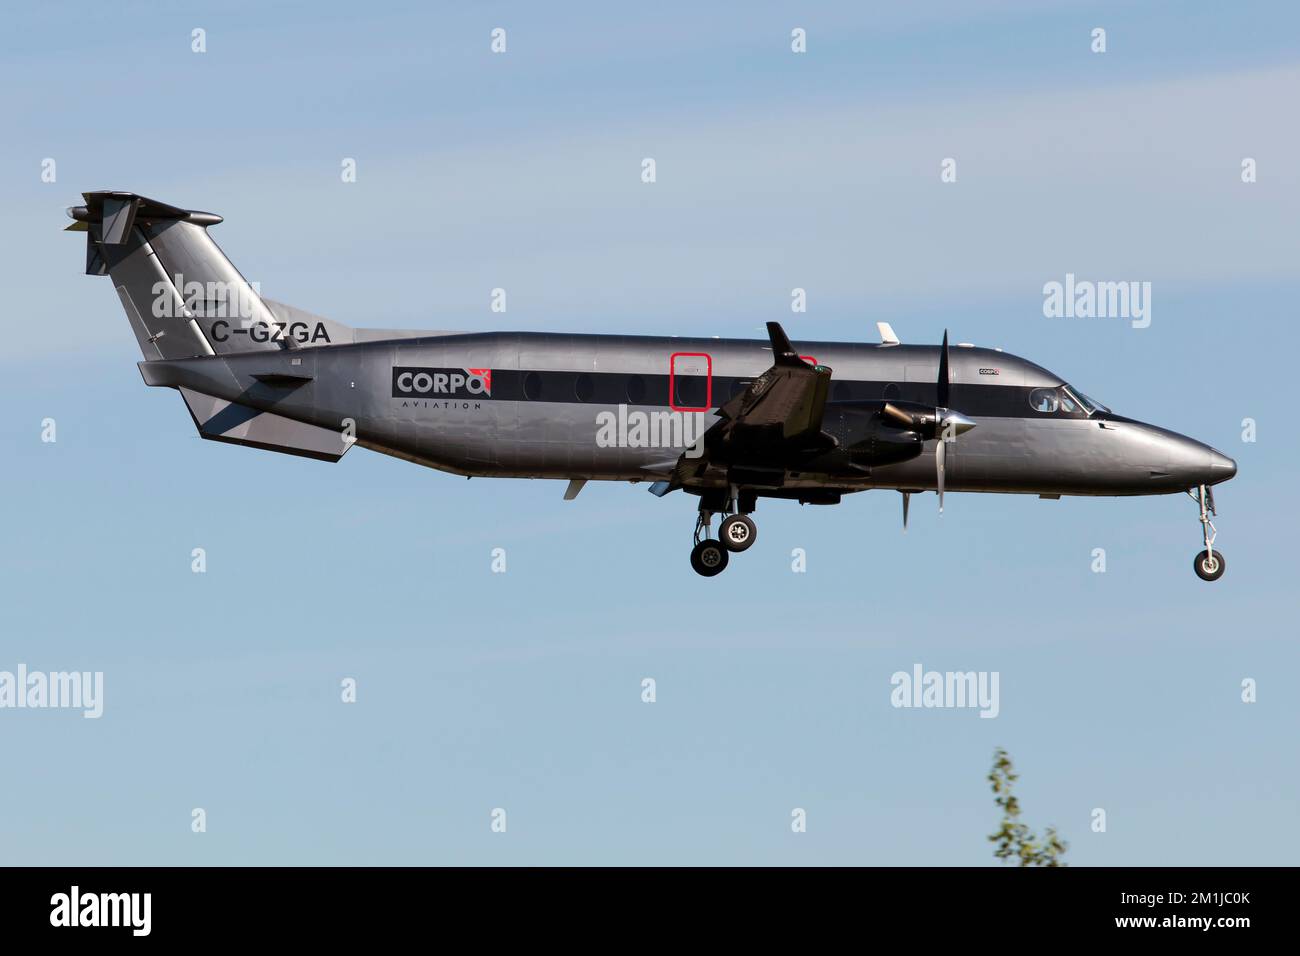 A Corpo Aviation Beechcraft 1900D landing at Quebec City airport.Corpo Aviation is a Quebec’s regional corporate carrier. Stock Photo